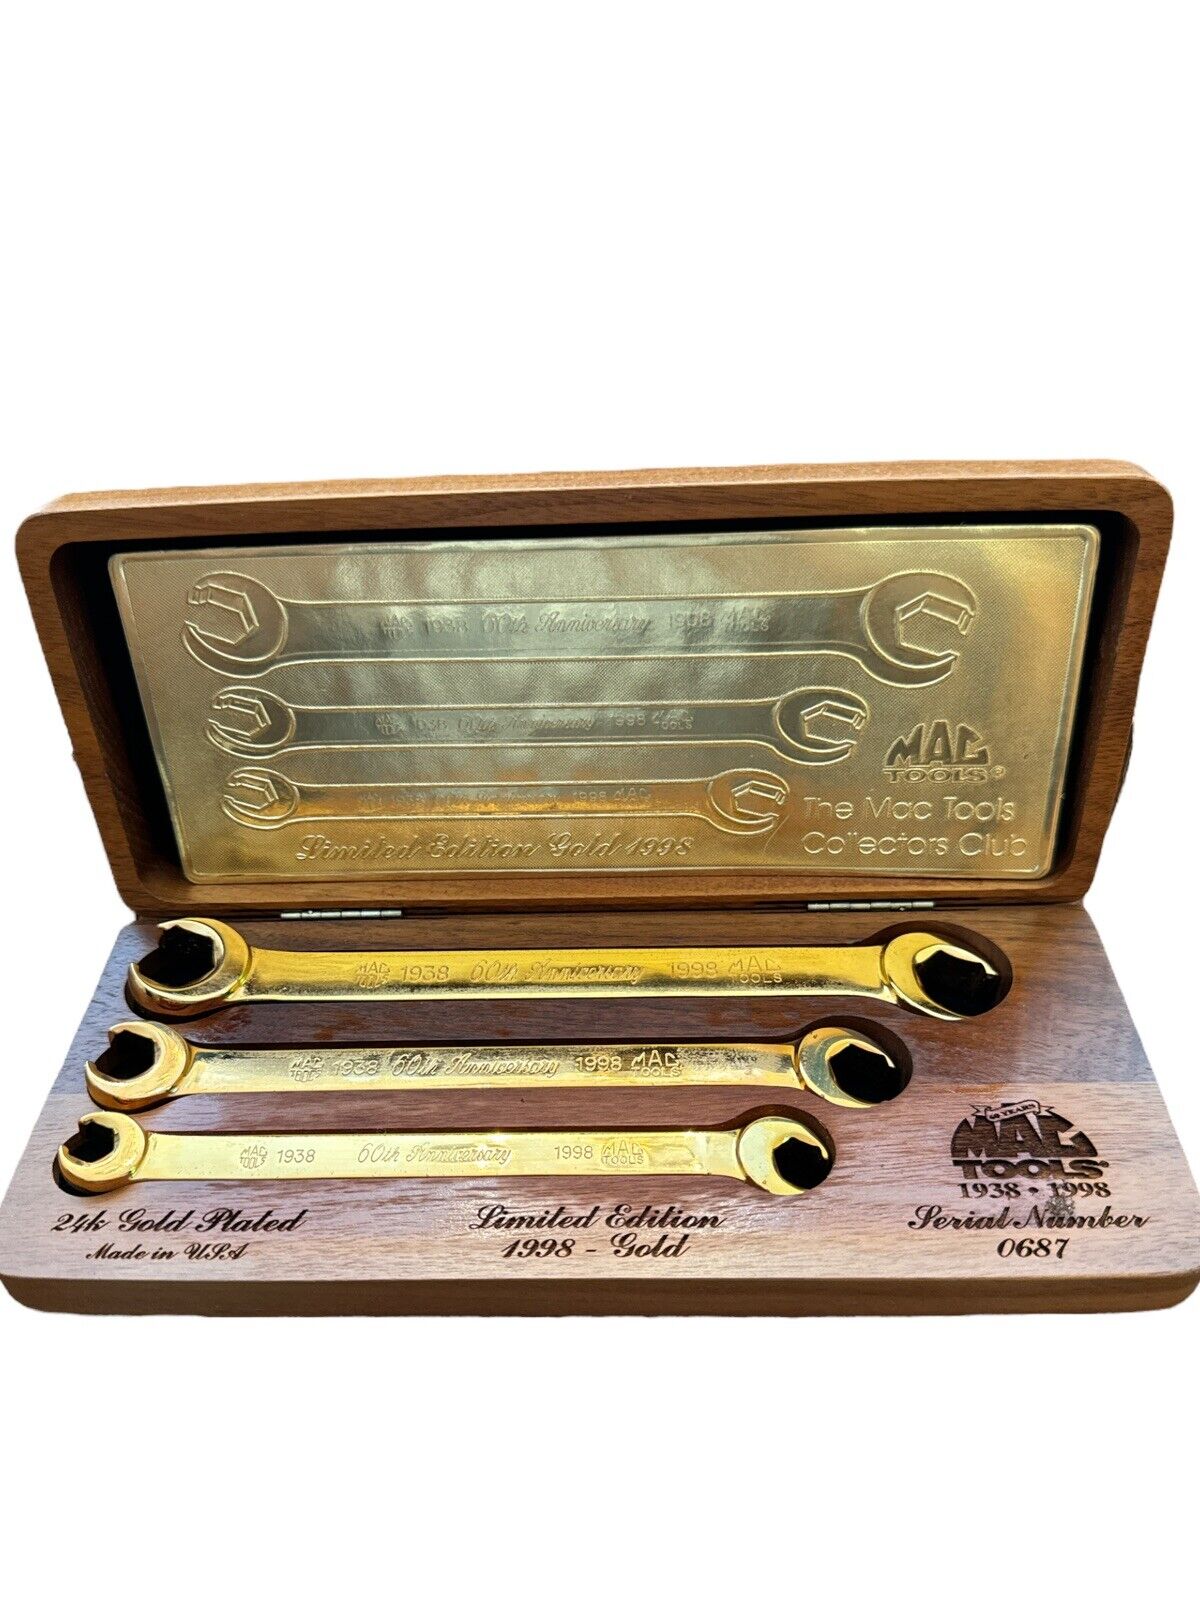 MAC TOOLS 60 Year Anniversary 24k Gold Wrench Set 1998 Limited Edition #0687